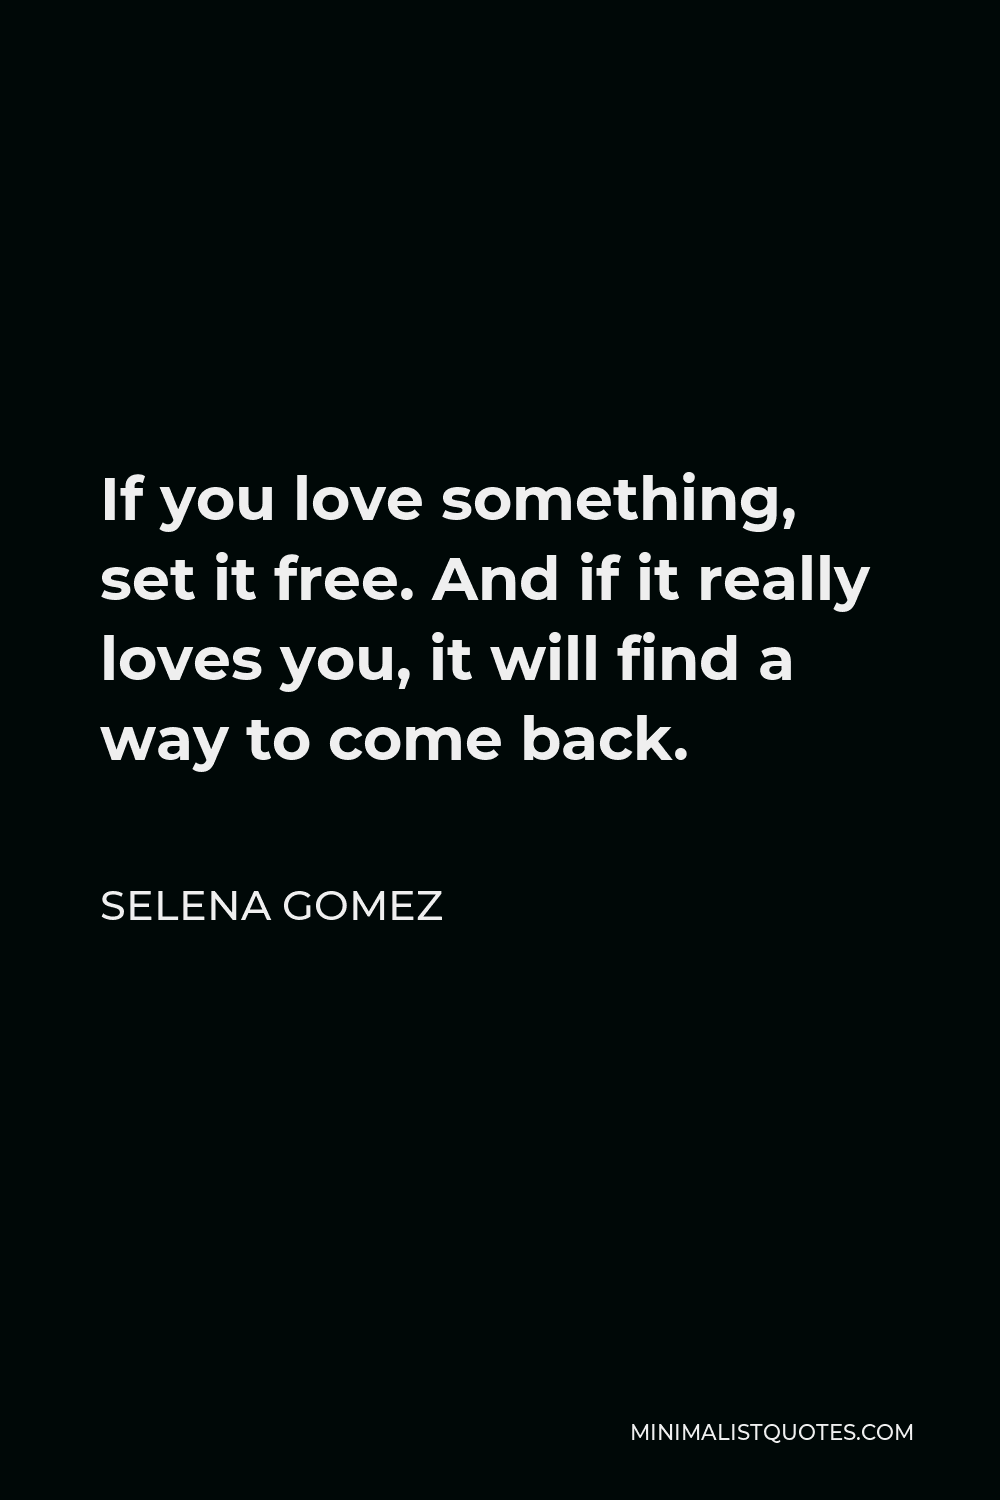 Selena Gomez Quote If You Love Something Set It Free And If It Really Loves You It Will Find A Way To Come Back